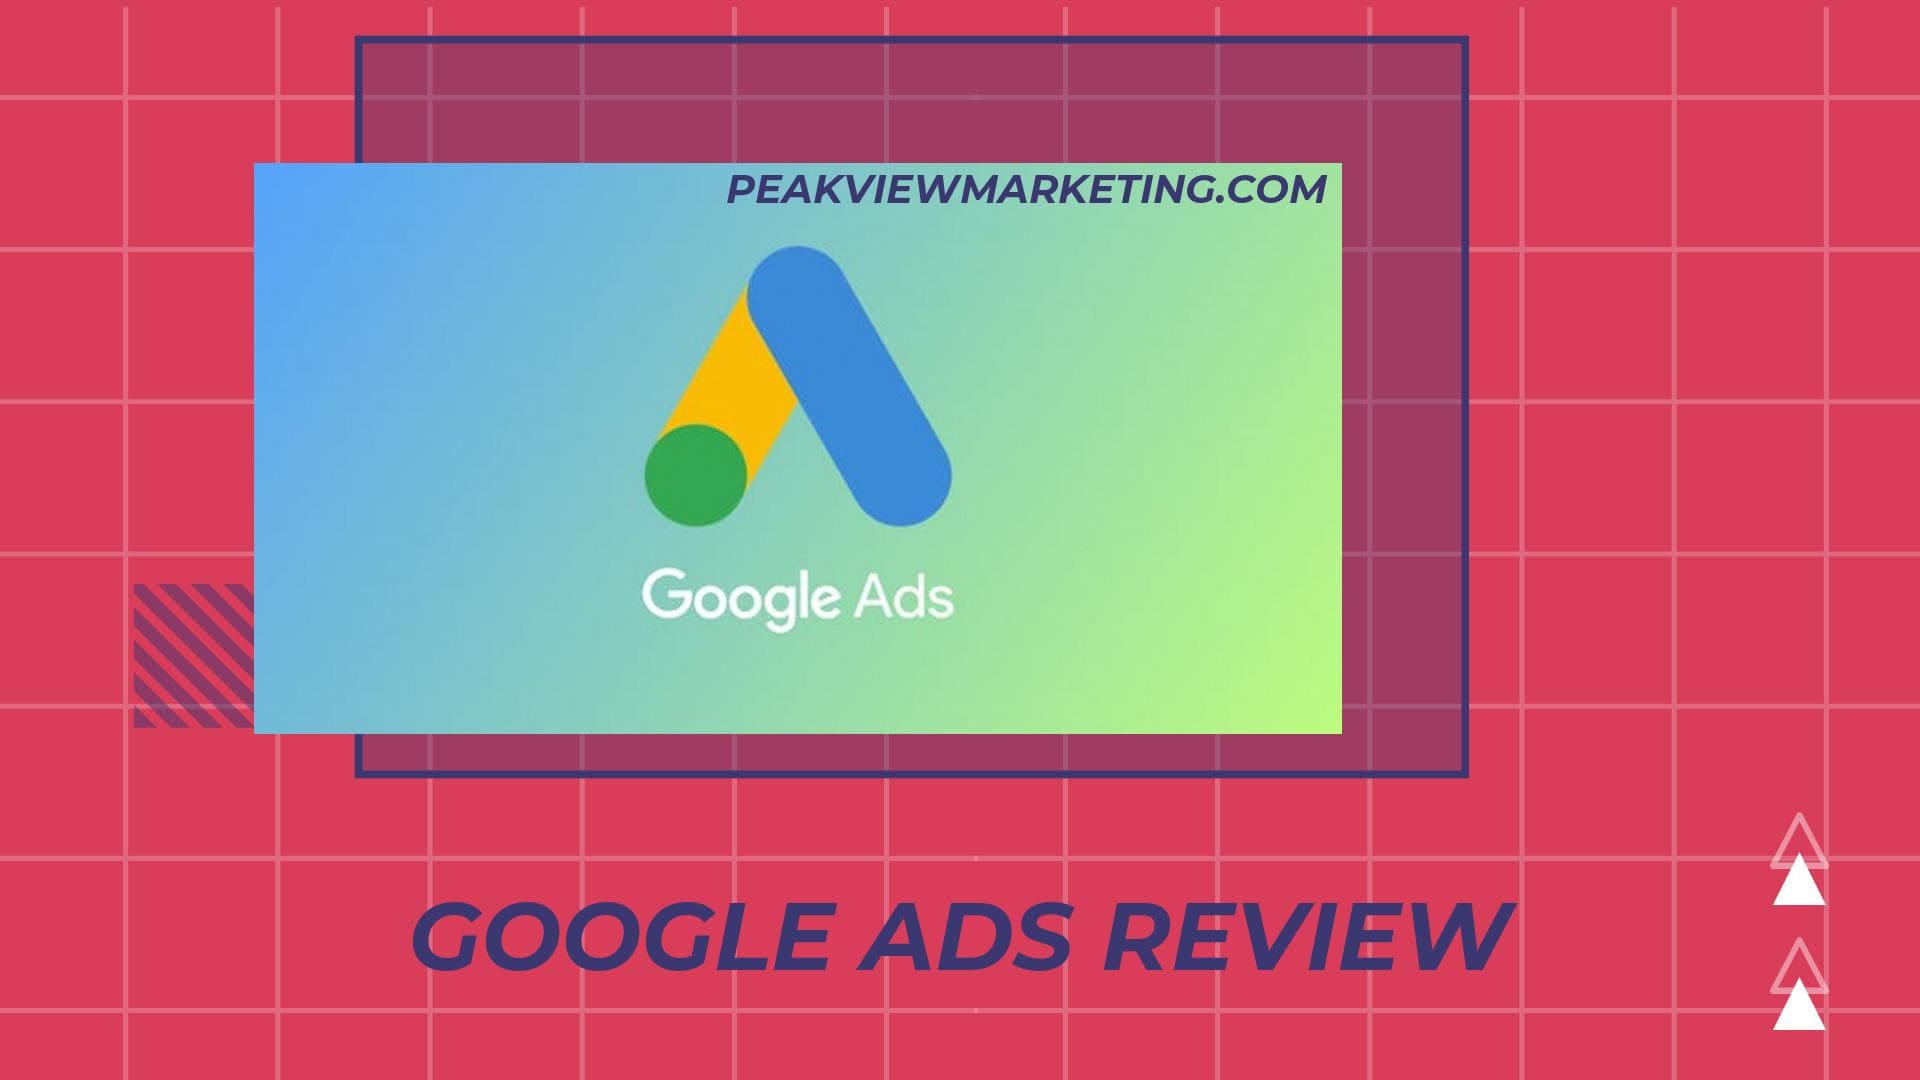 Google Ads Review Image